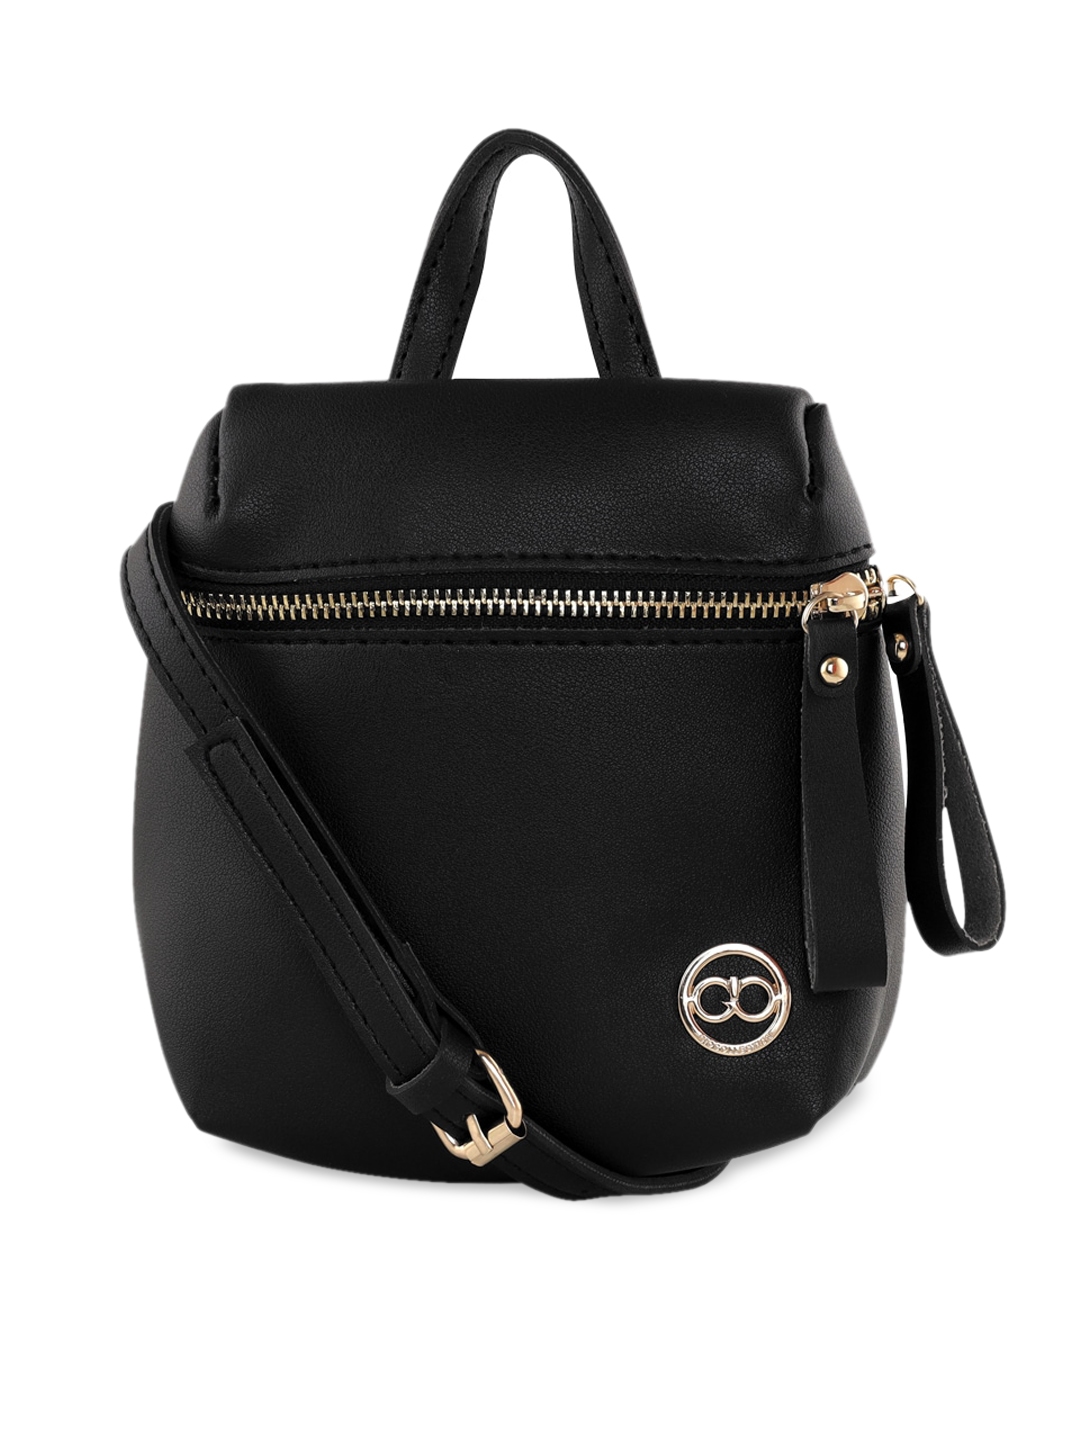 GIO COLLECTION Black Solid Handheld Bag